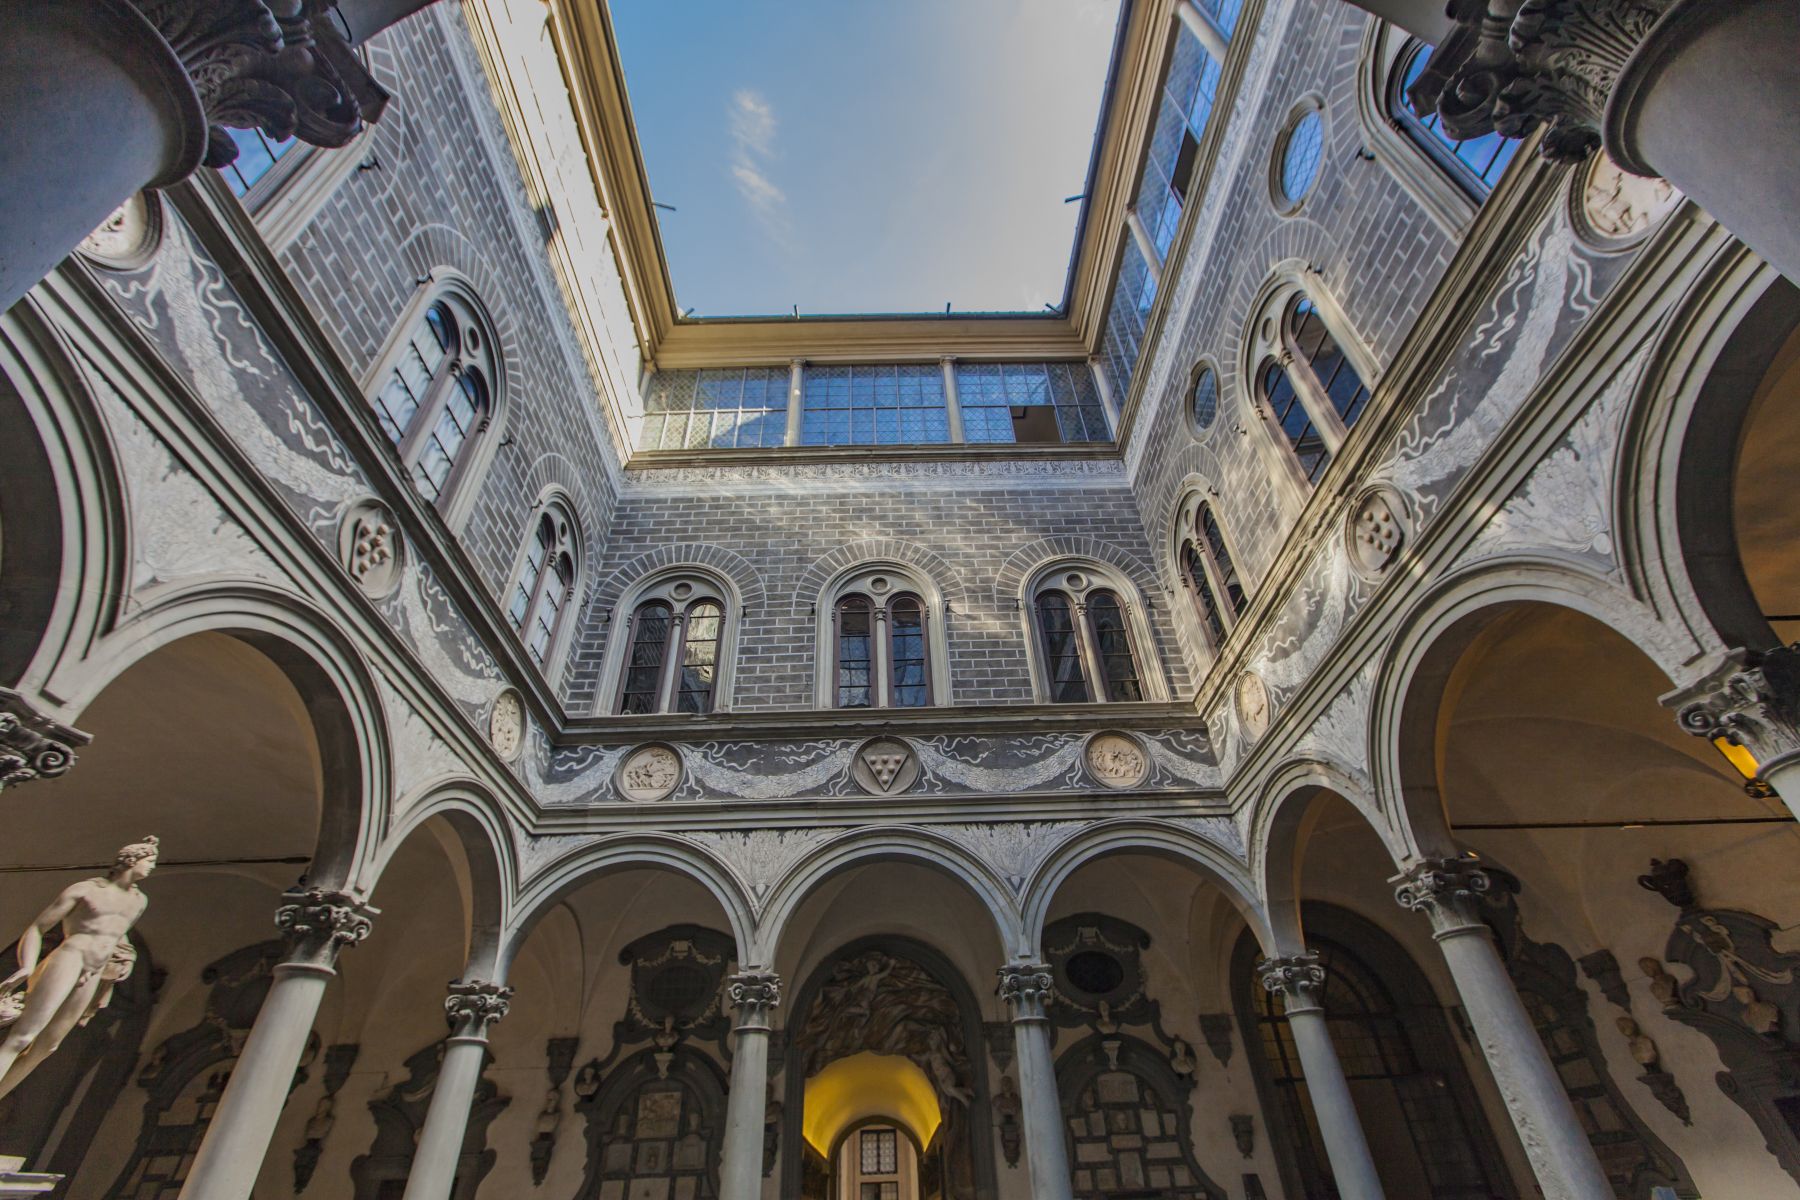 Palazzo Medici Riccardi in Florence and its wonders.